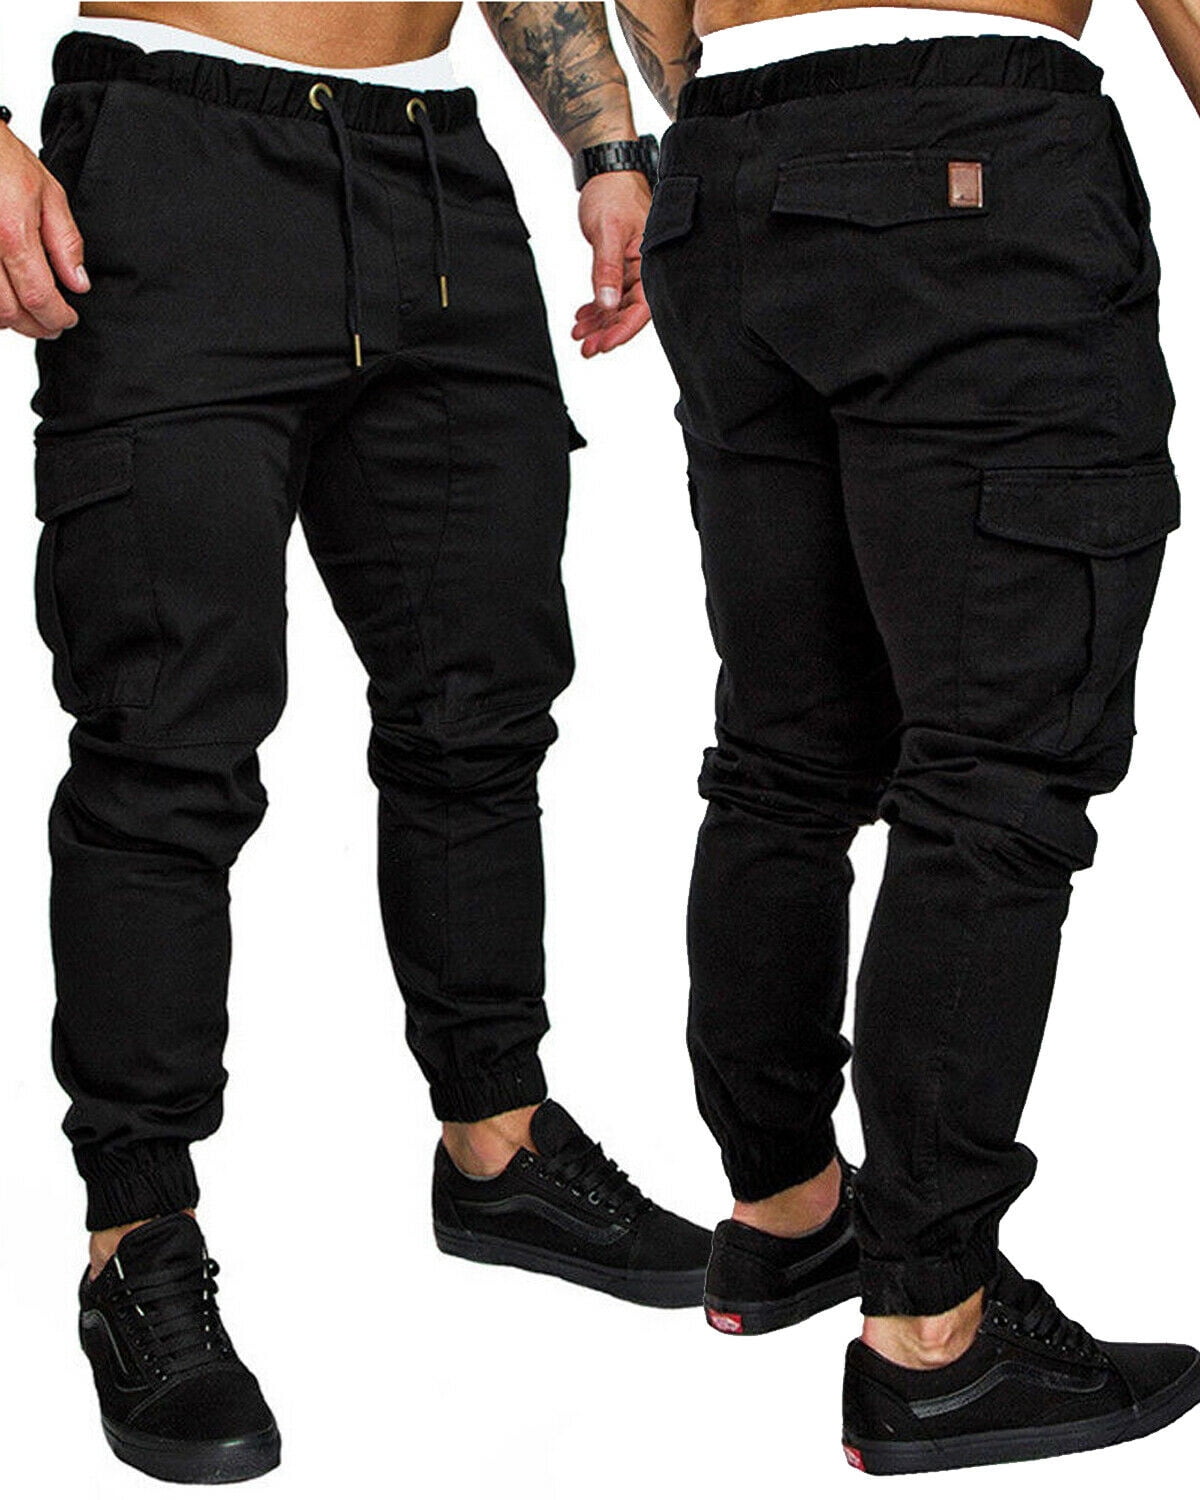 wsevypo - Mens Cargo Pants Elastic Banded ankle cuff Military Urban ...